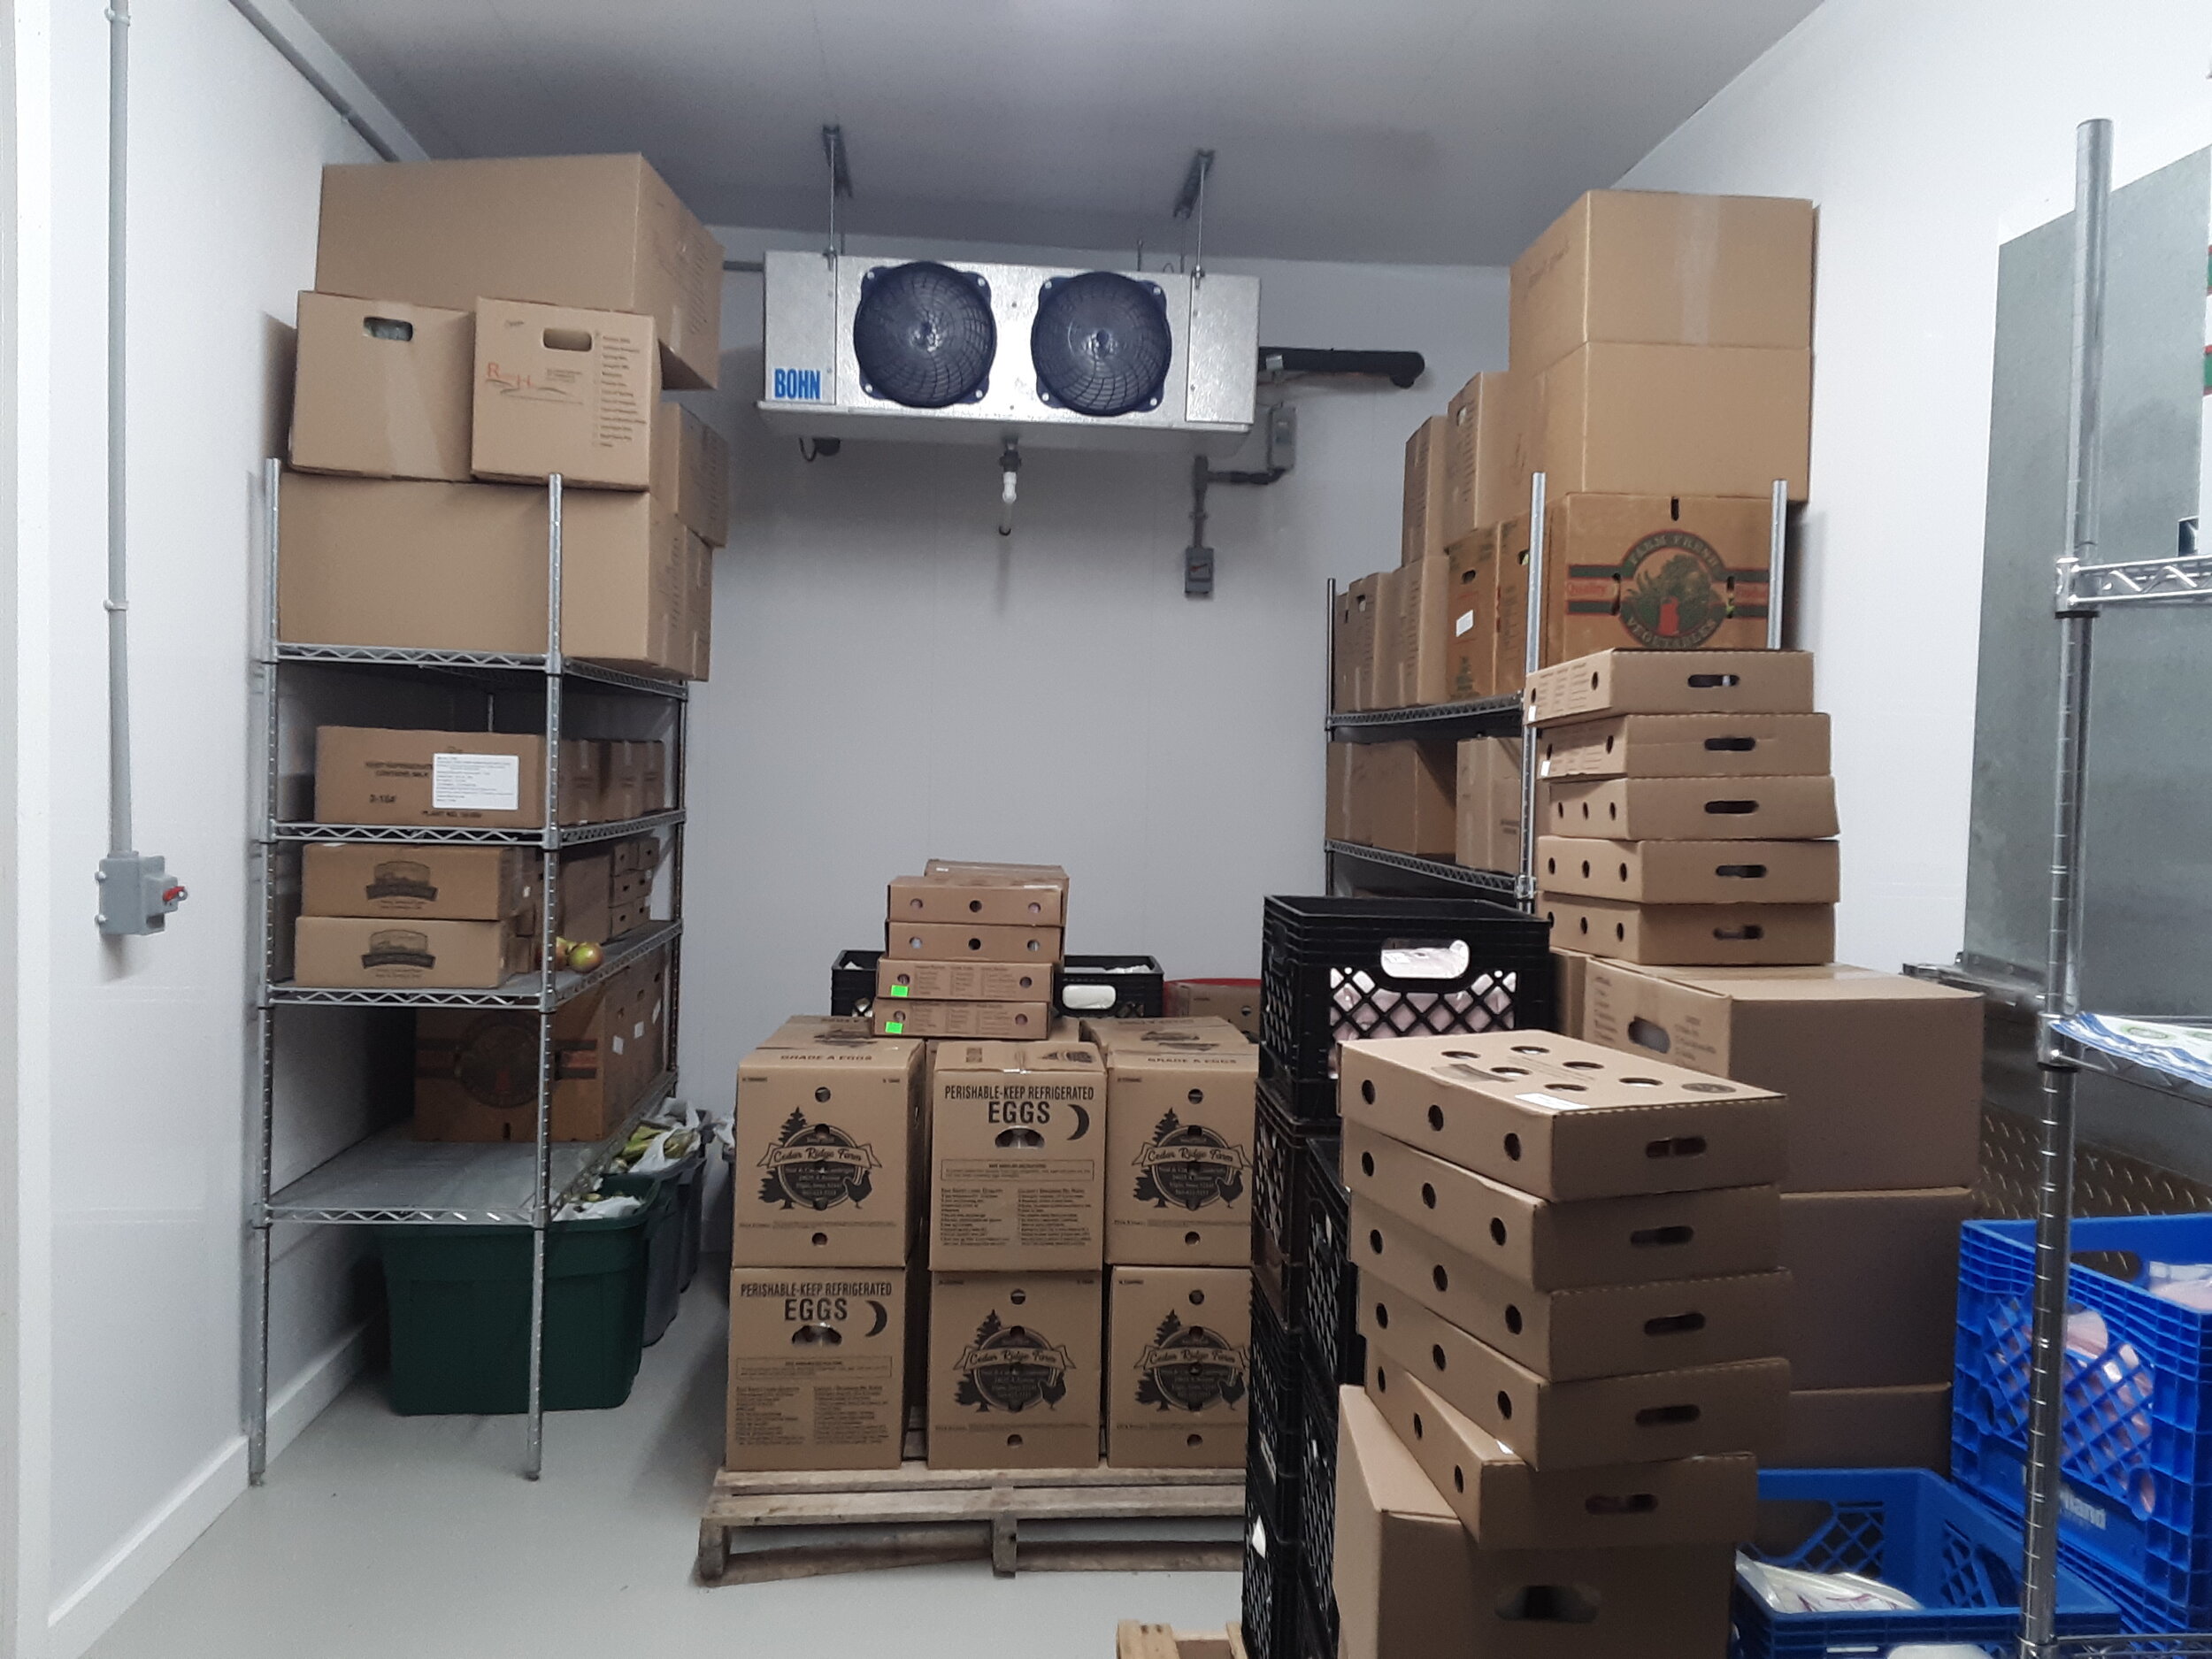 walk-in cooler full of boxes of food